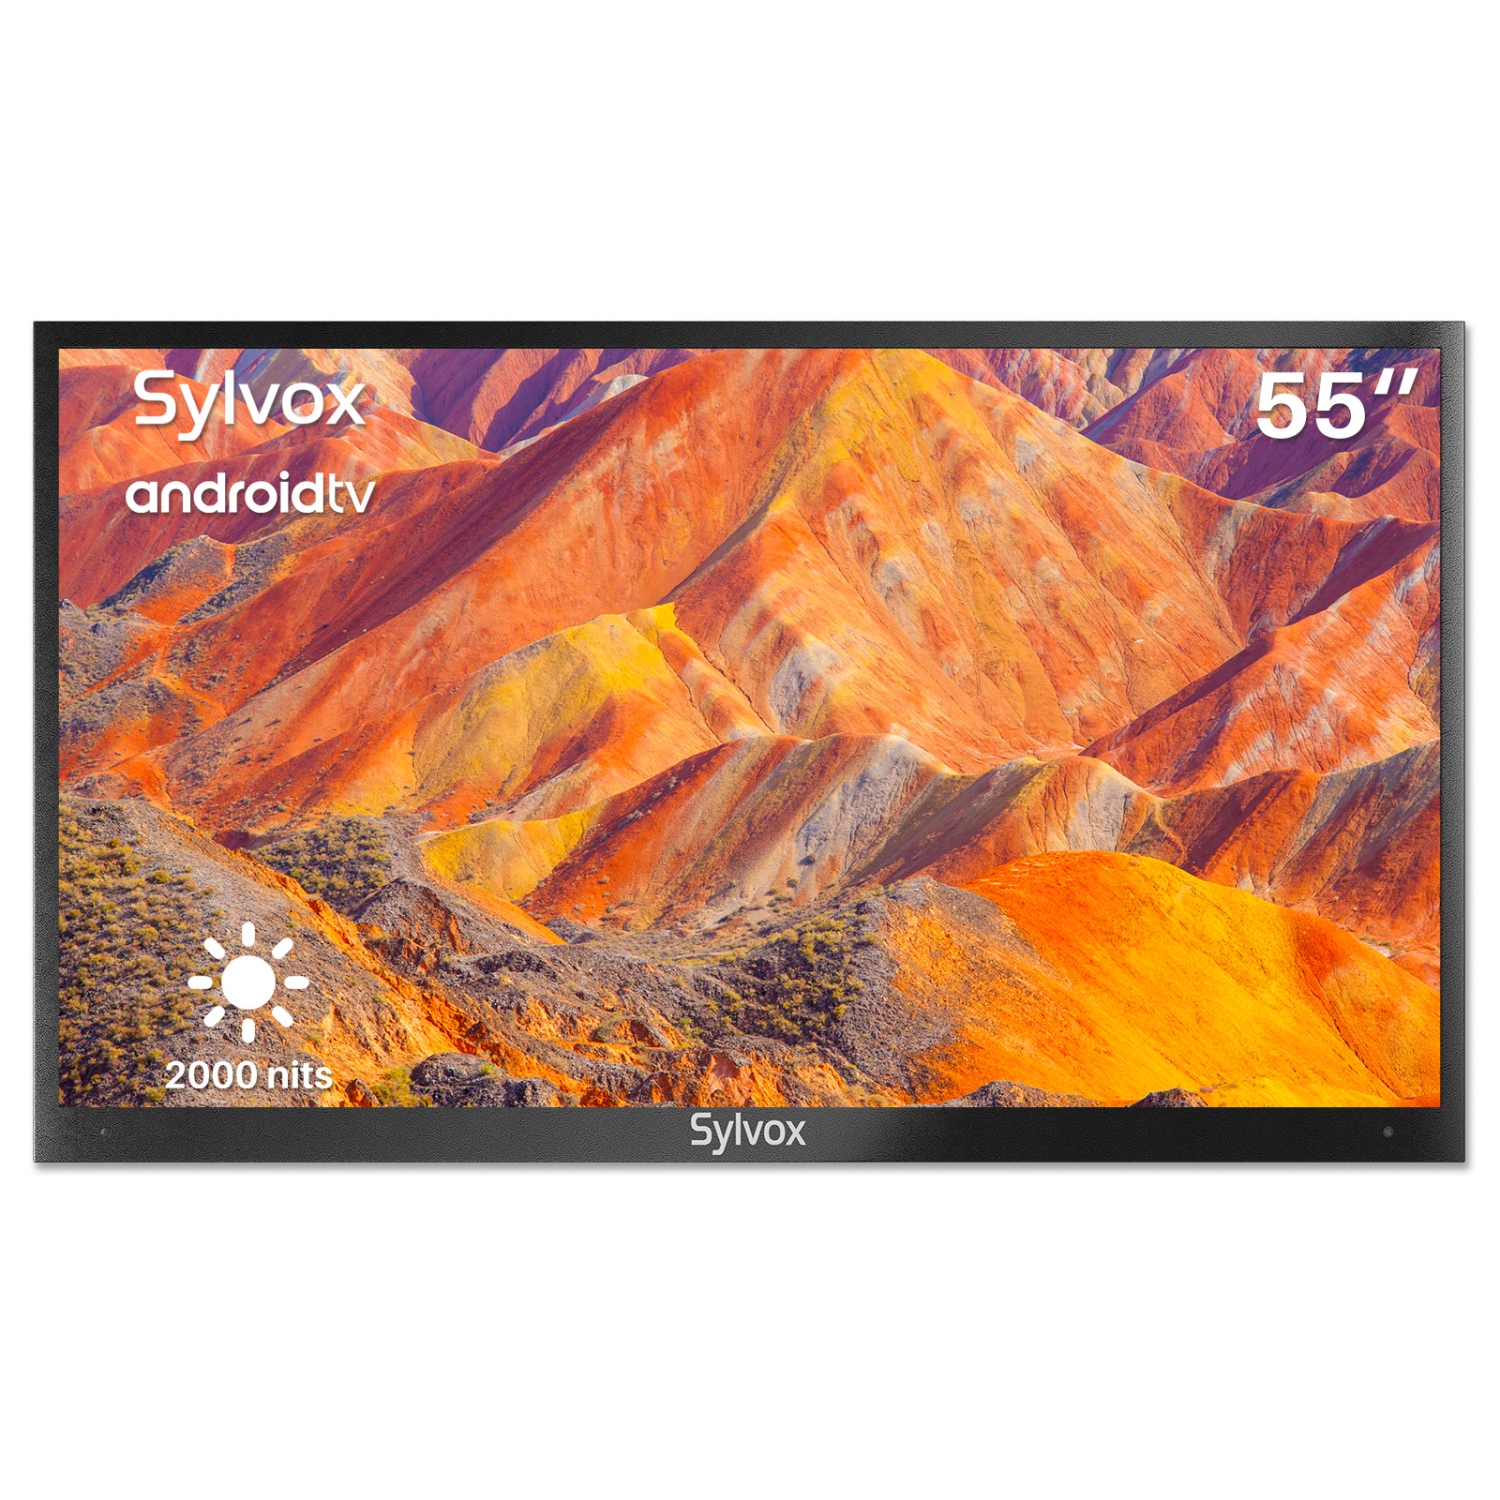 SYLVOX Outdoor TV Pool Pro Series 55 inch Smart Outside TV 2000nits Waterproof Full Sun Outdoor Television,Built-in Google Play Voice Assistant and Chromecast